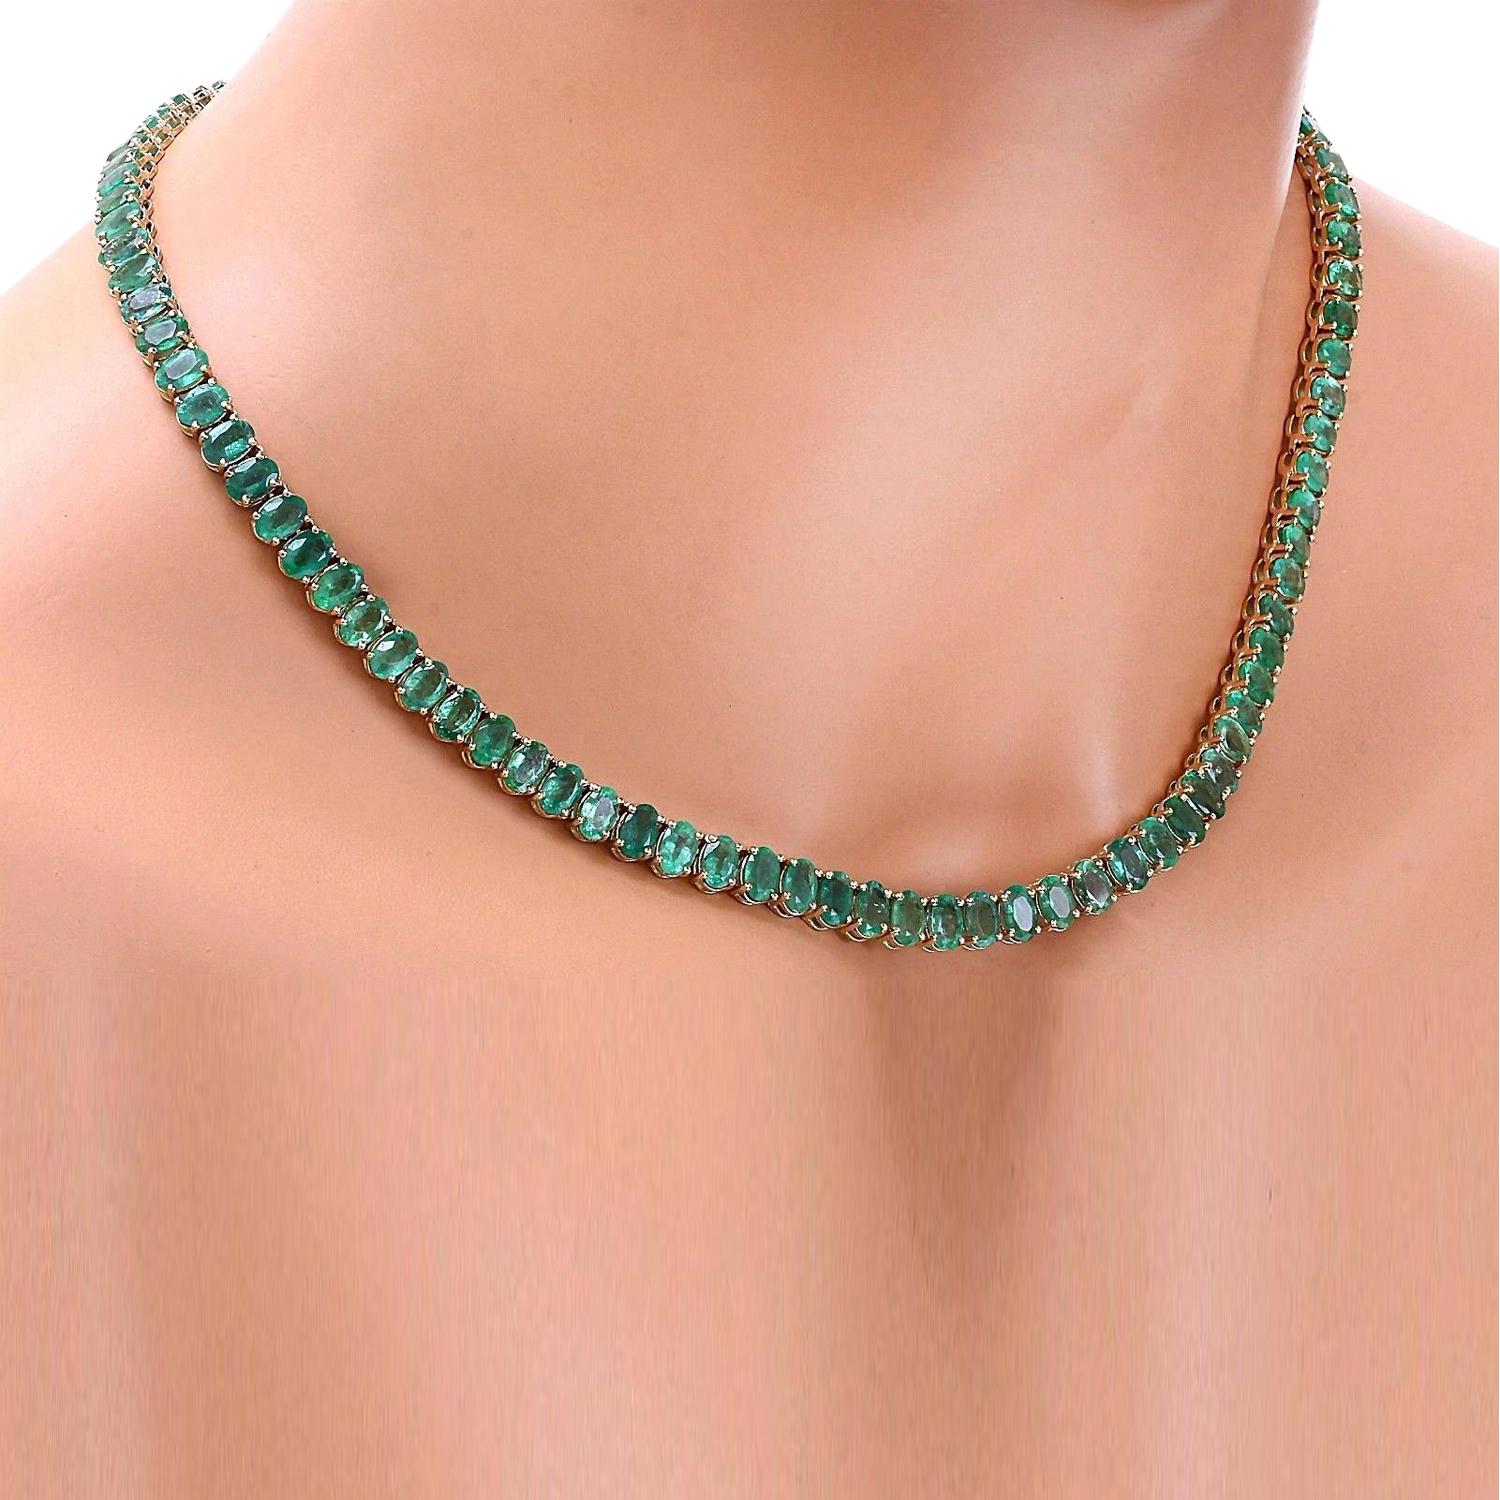 Elevate your elegance with our exquisite 48.00 Carat Emerald 14K Solid Yellow Gold Necklace. This tennis-style necklace boasts a length of 17 inches, making it a perfect statement piece for any occasion. Crafted from luxurious 14K Yellow Gold, it